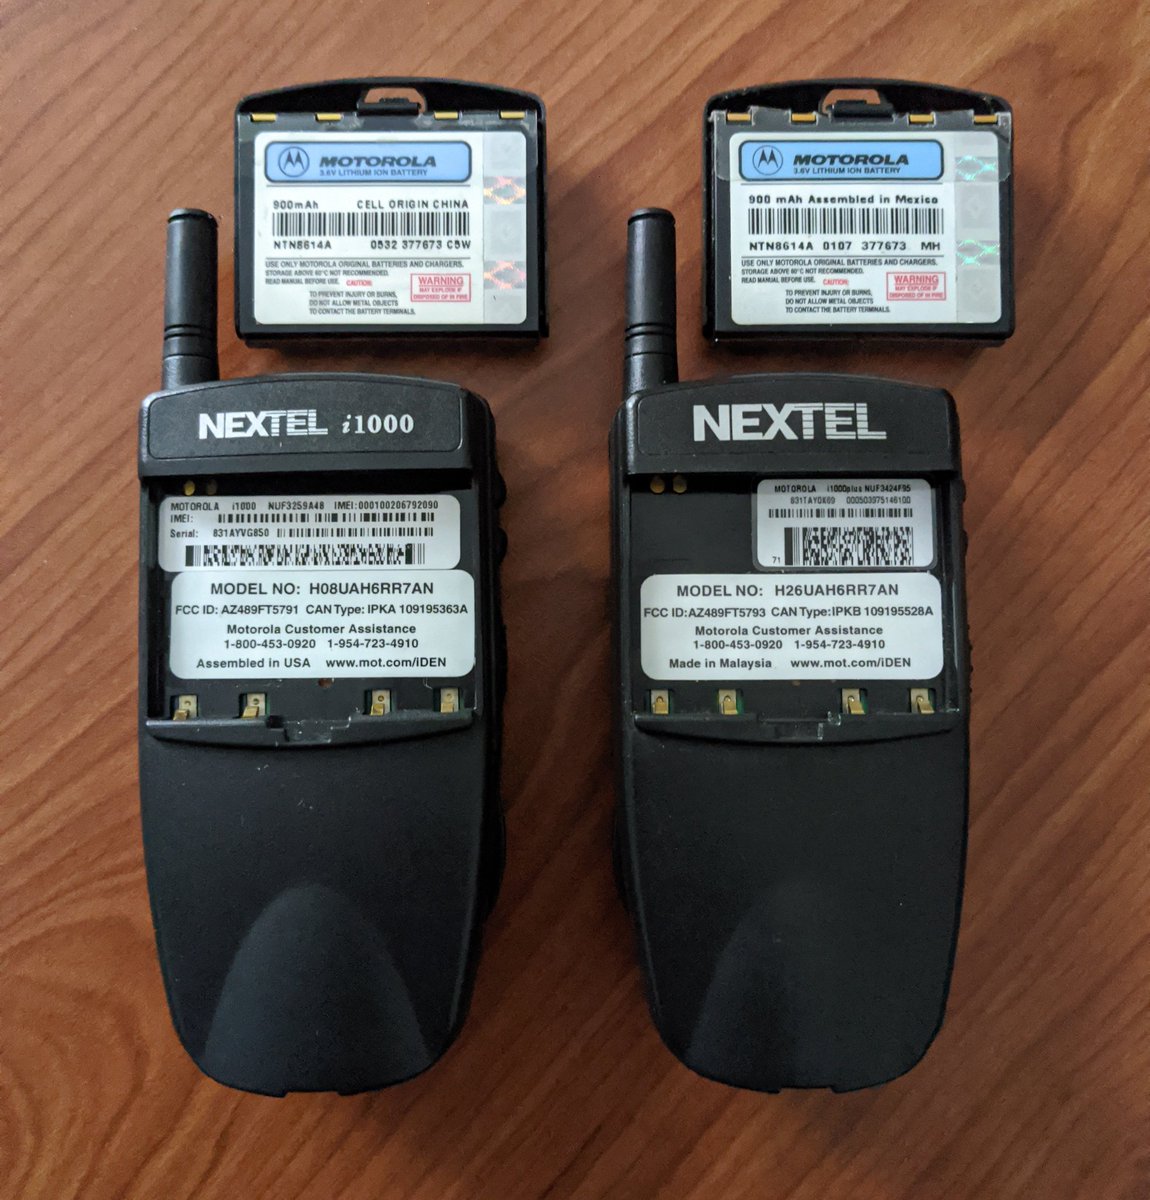 NEXTEL Motorola i1000 & i1000plus ESMR UHF 800 MHz/iDEN 800 MHz
Released in 1998&1999
1/3 This network combination was called the first mobile social network.
To be continued ...
#nextel #motorola #moto #retrotech #retrophone #cellphone #usa #canada #mobilekeepers #phonekeepers